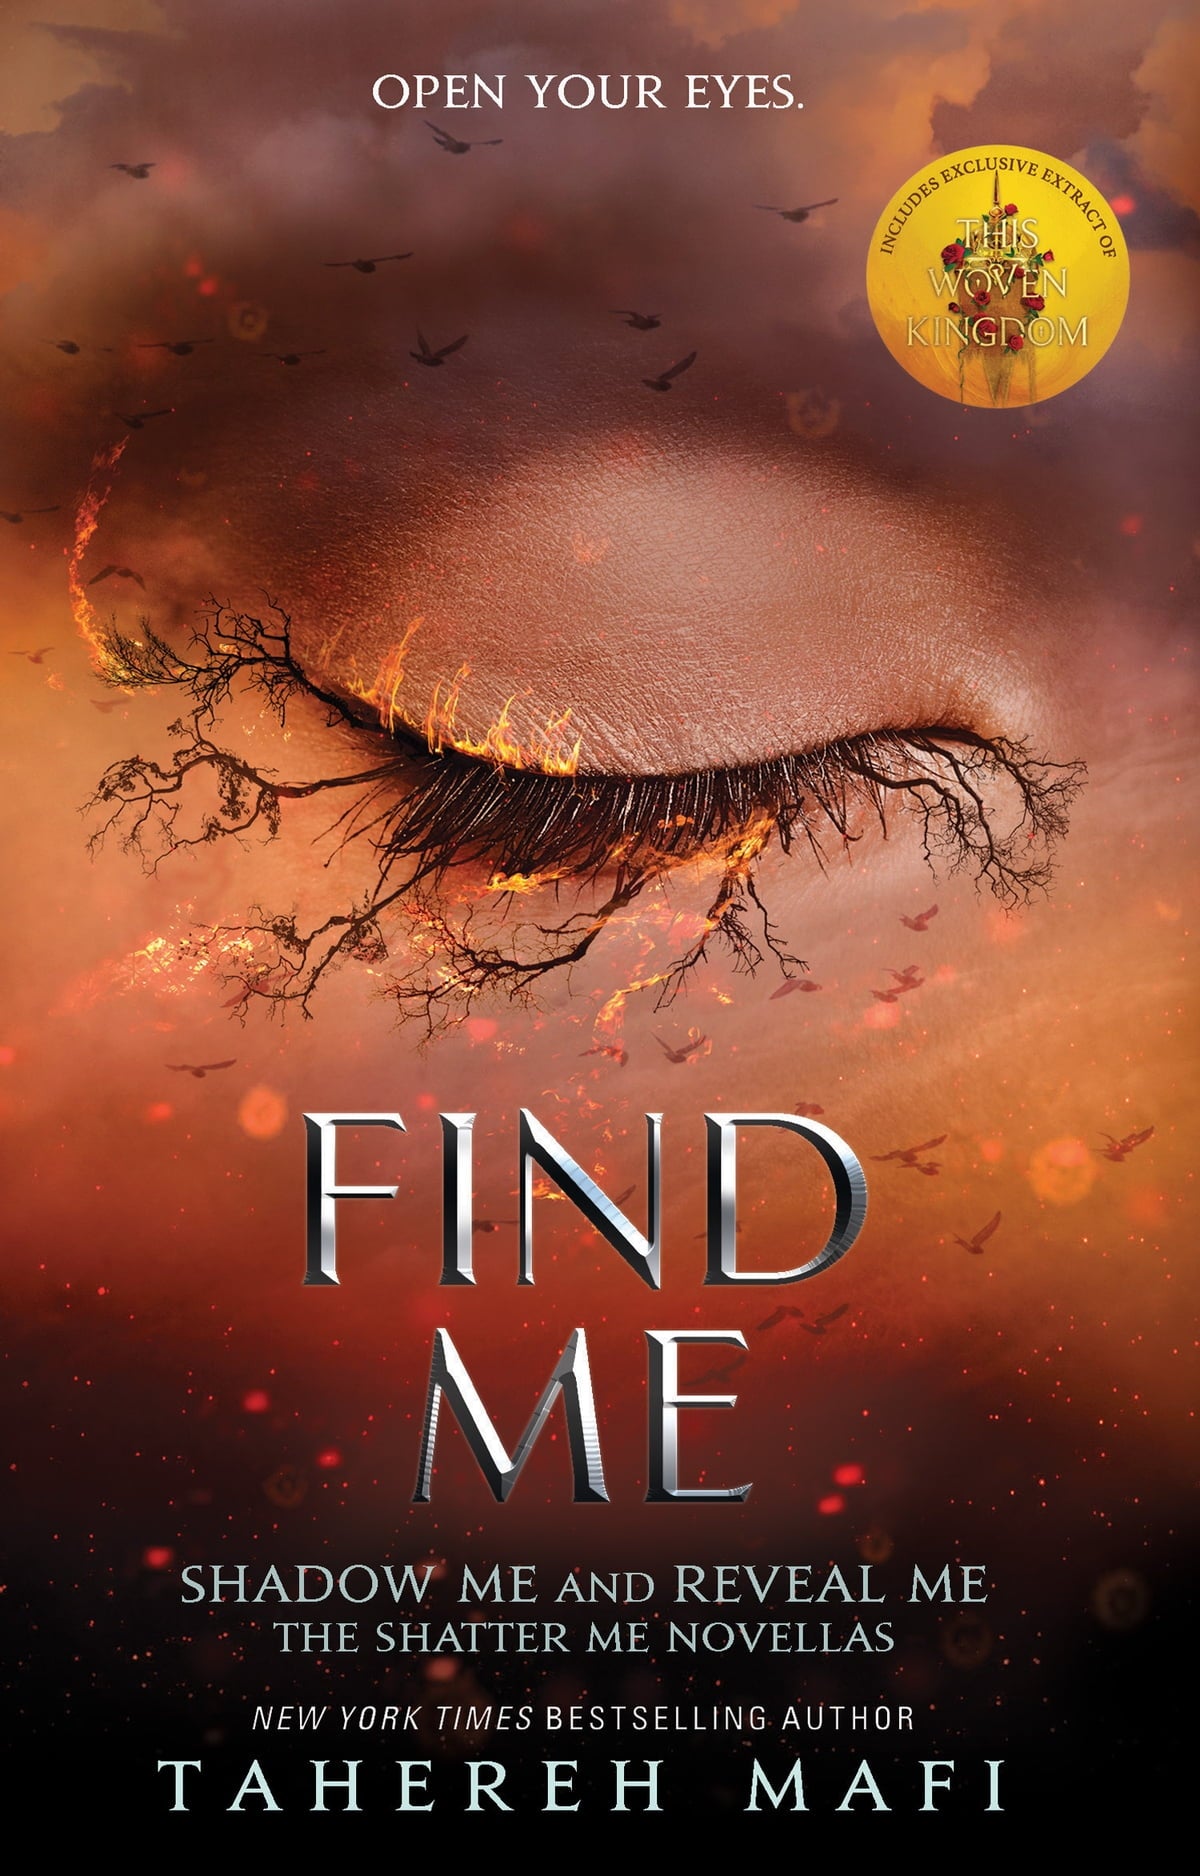 Find Me by Tahereh Mafi